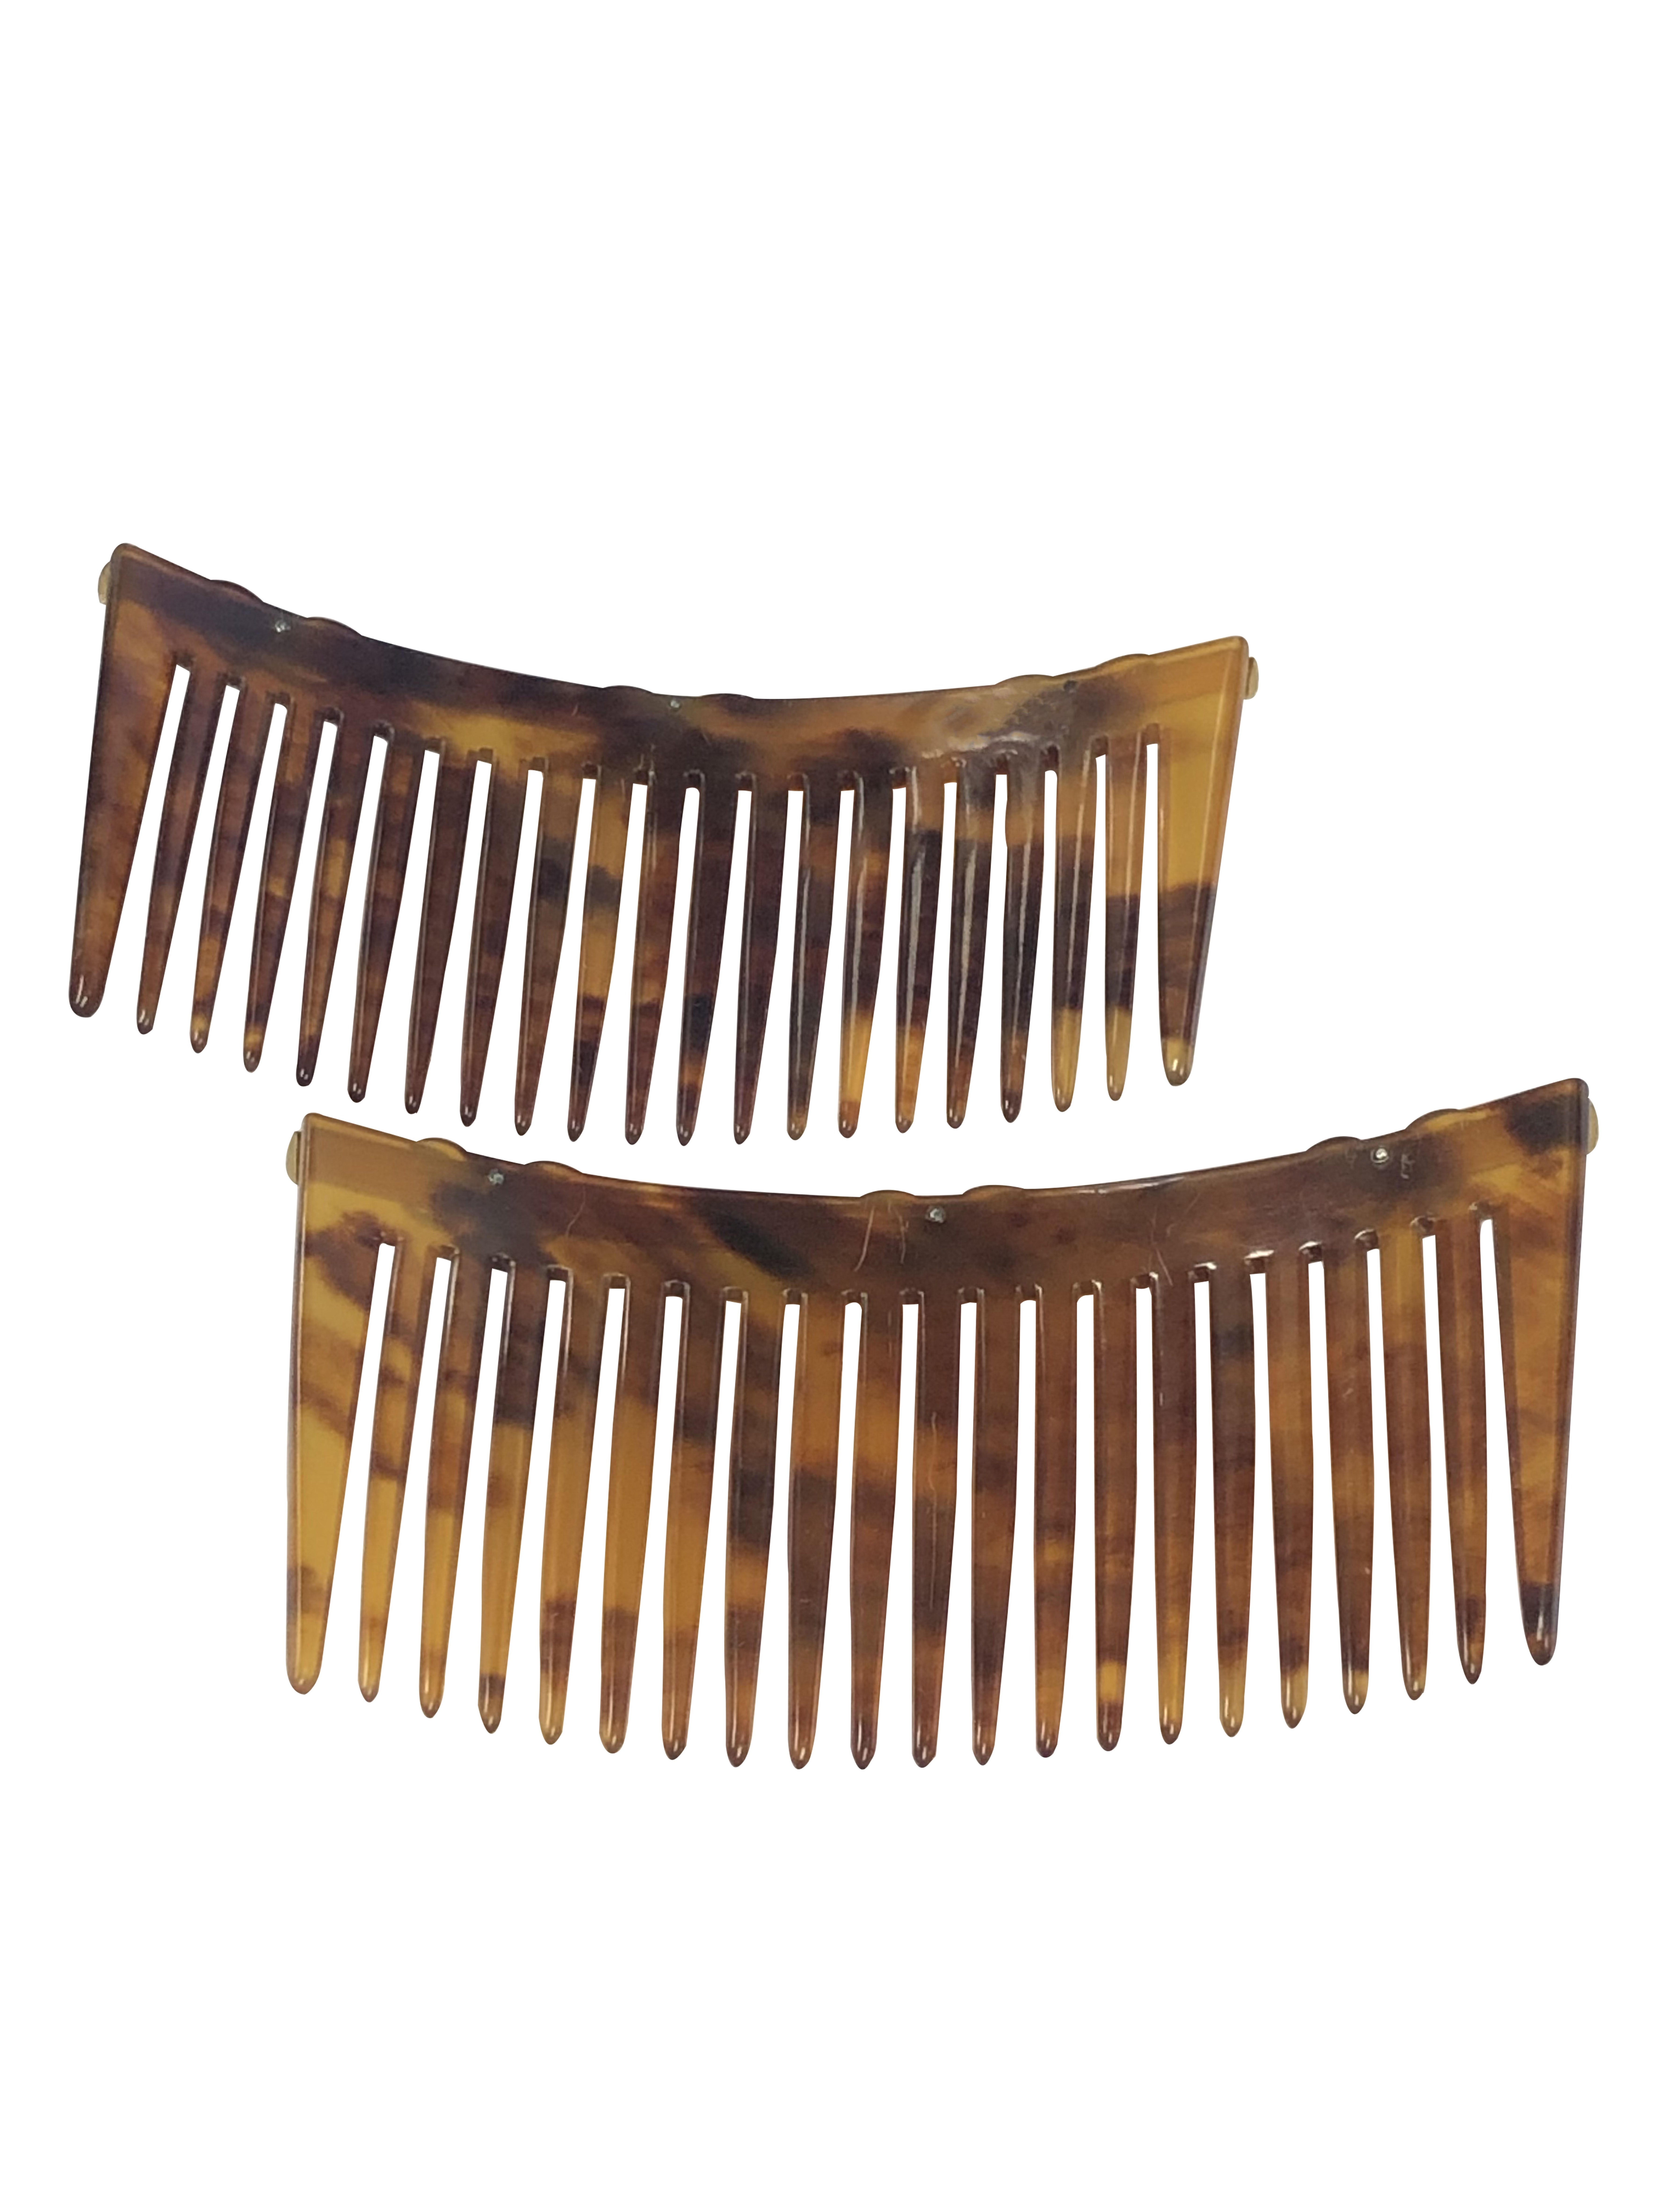 Circa 1915 Hair combs, Tortoise Shell with 18K Yellow Gold  and Platinum Mounts set with Rose cut Diamonds, measuring 3 5/8 inches in length X 2 inches. Excellent, seldom used condition. 